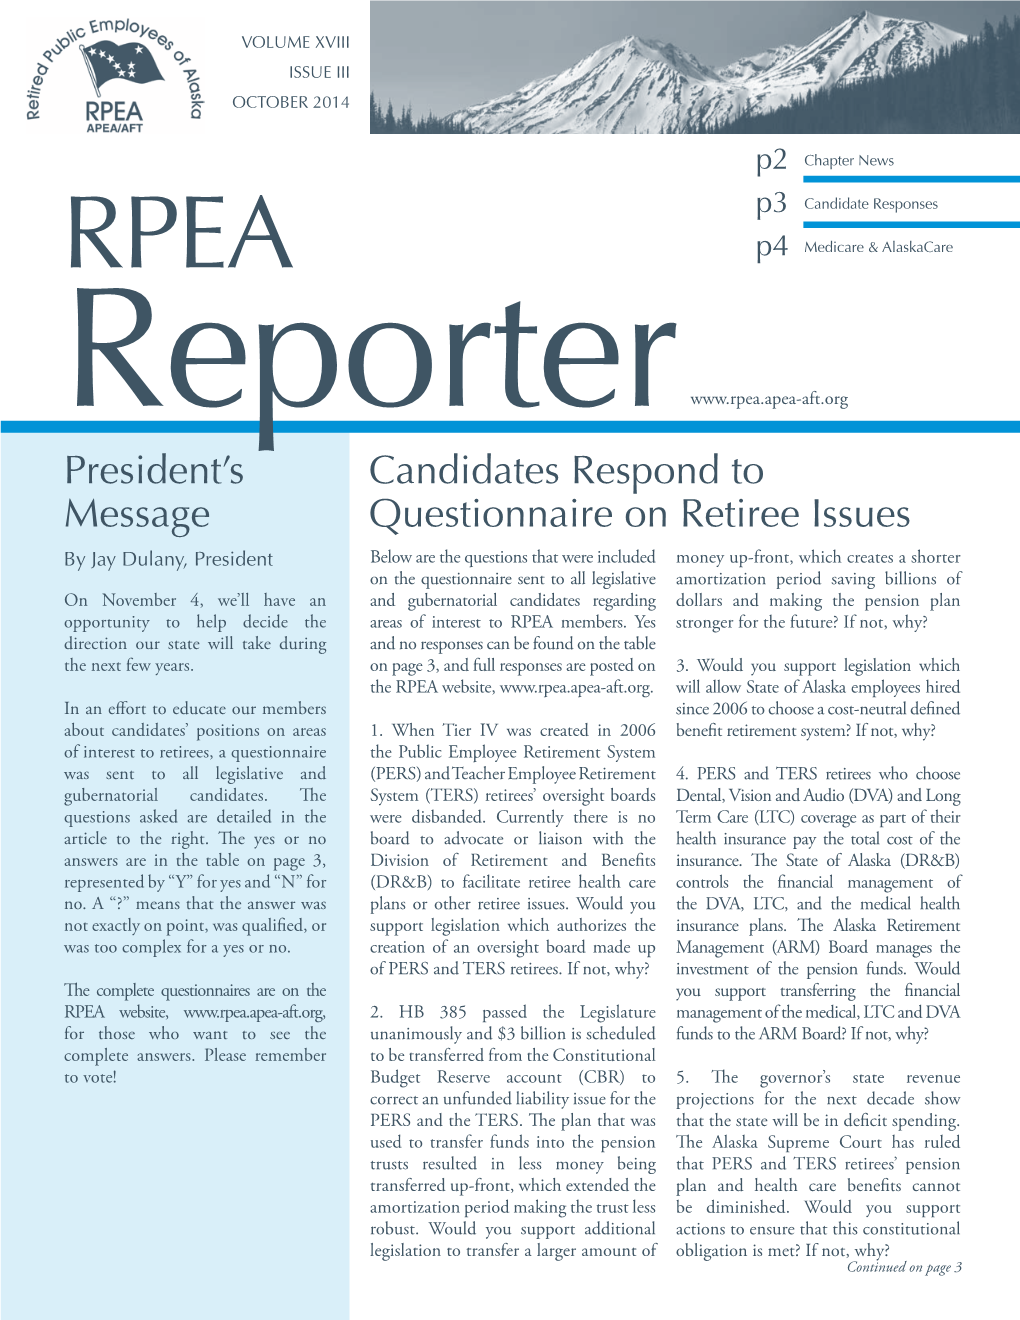 Candidates Respond to Questionnaire on Retiree Issues President's